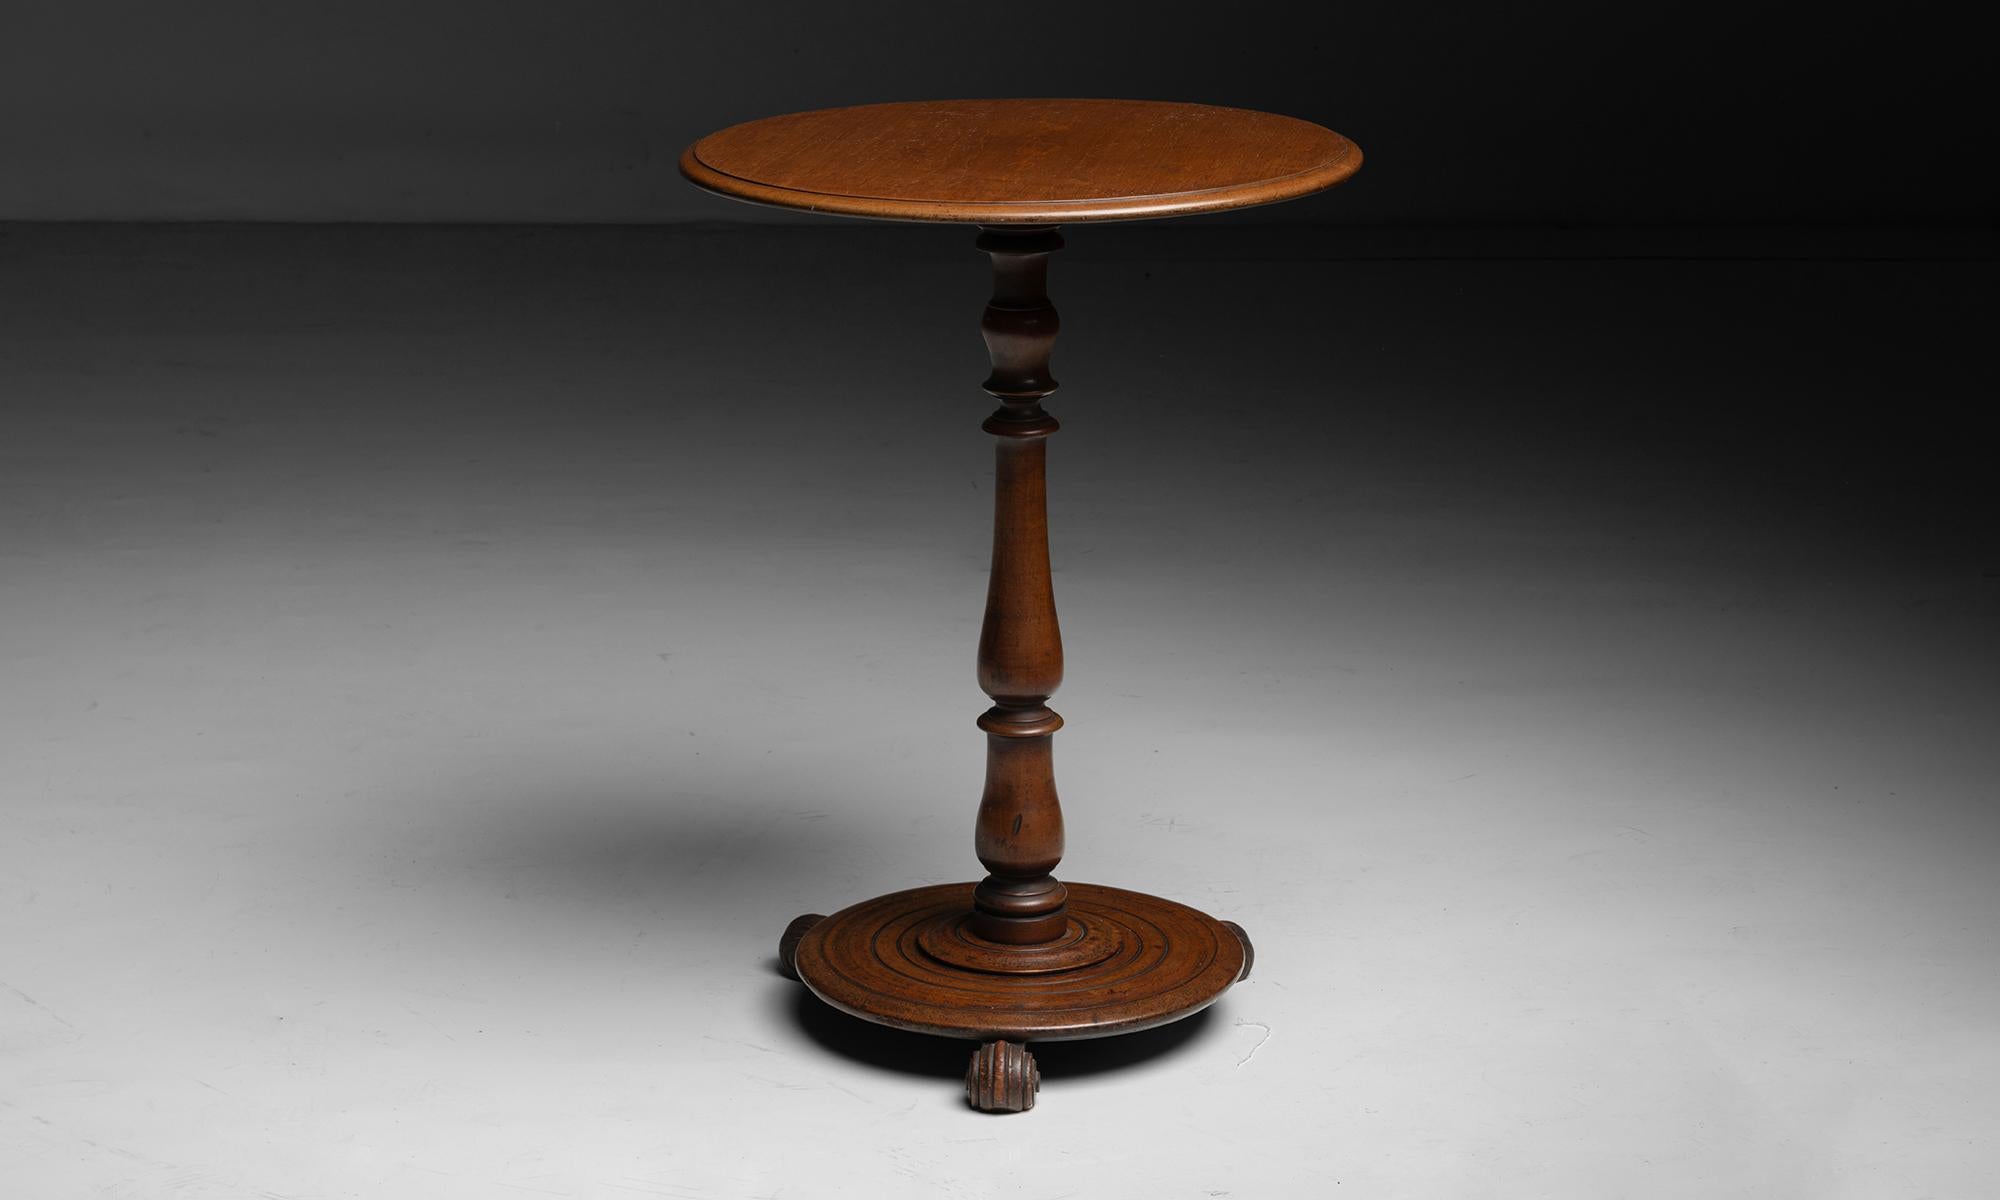 Soho Bazaar Wine Table

England circa 1840

Elegant side table in mahogany. Turned and carved details. Stamped underneath.

20.75”dia x 27”h